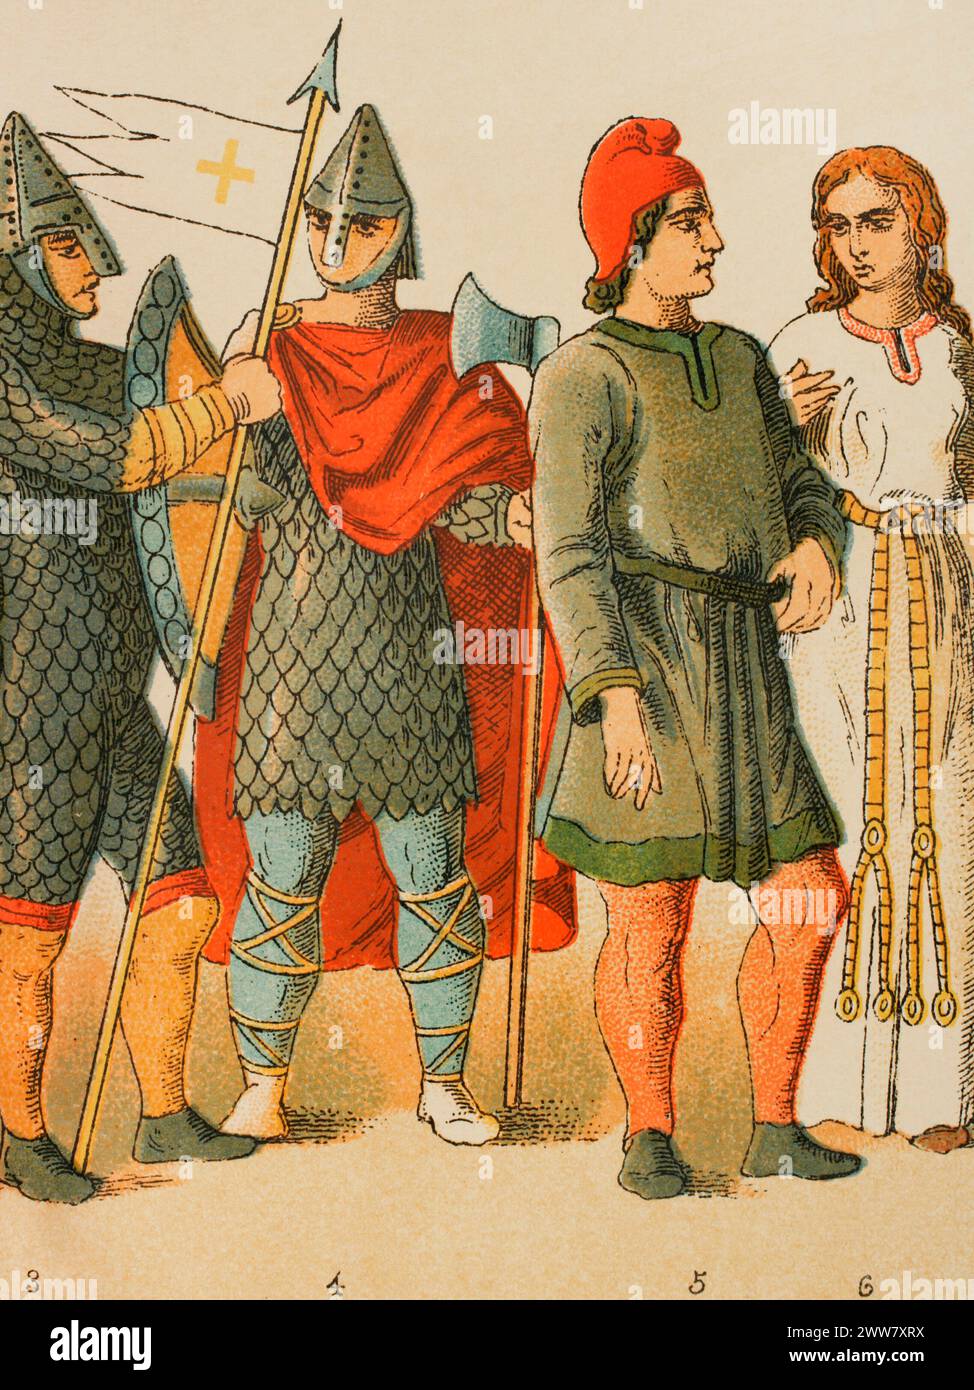 History of France, 1000. From left to right, 3-4: warriors, 5-6: ordinary people. Chromolithography. 'Historia Universal', by César Cantú. Volume V, 1884. Stock Photo